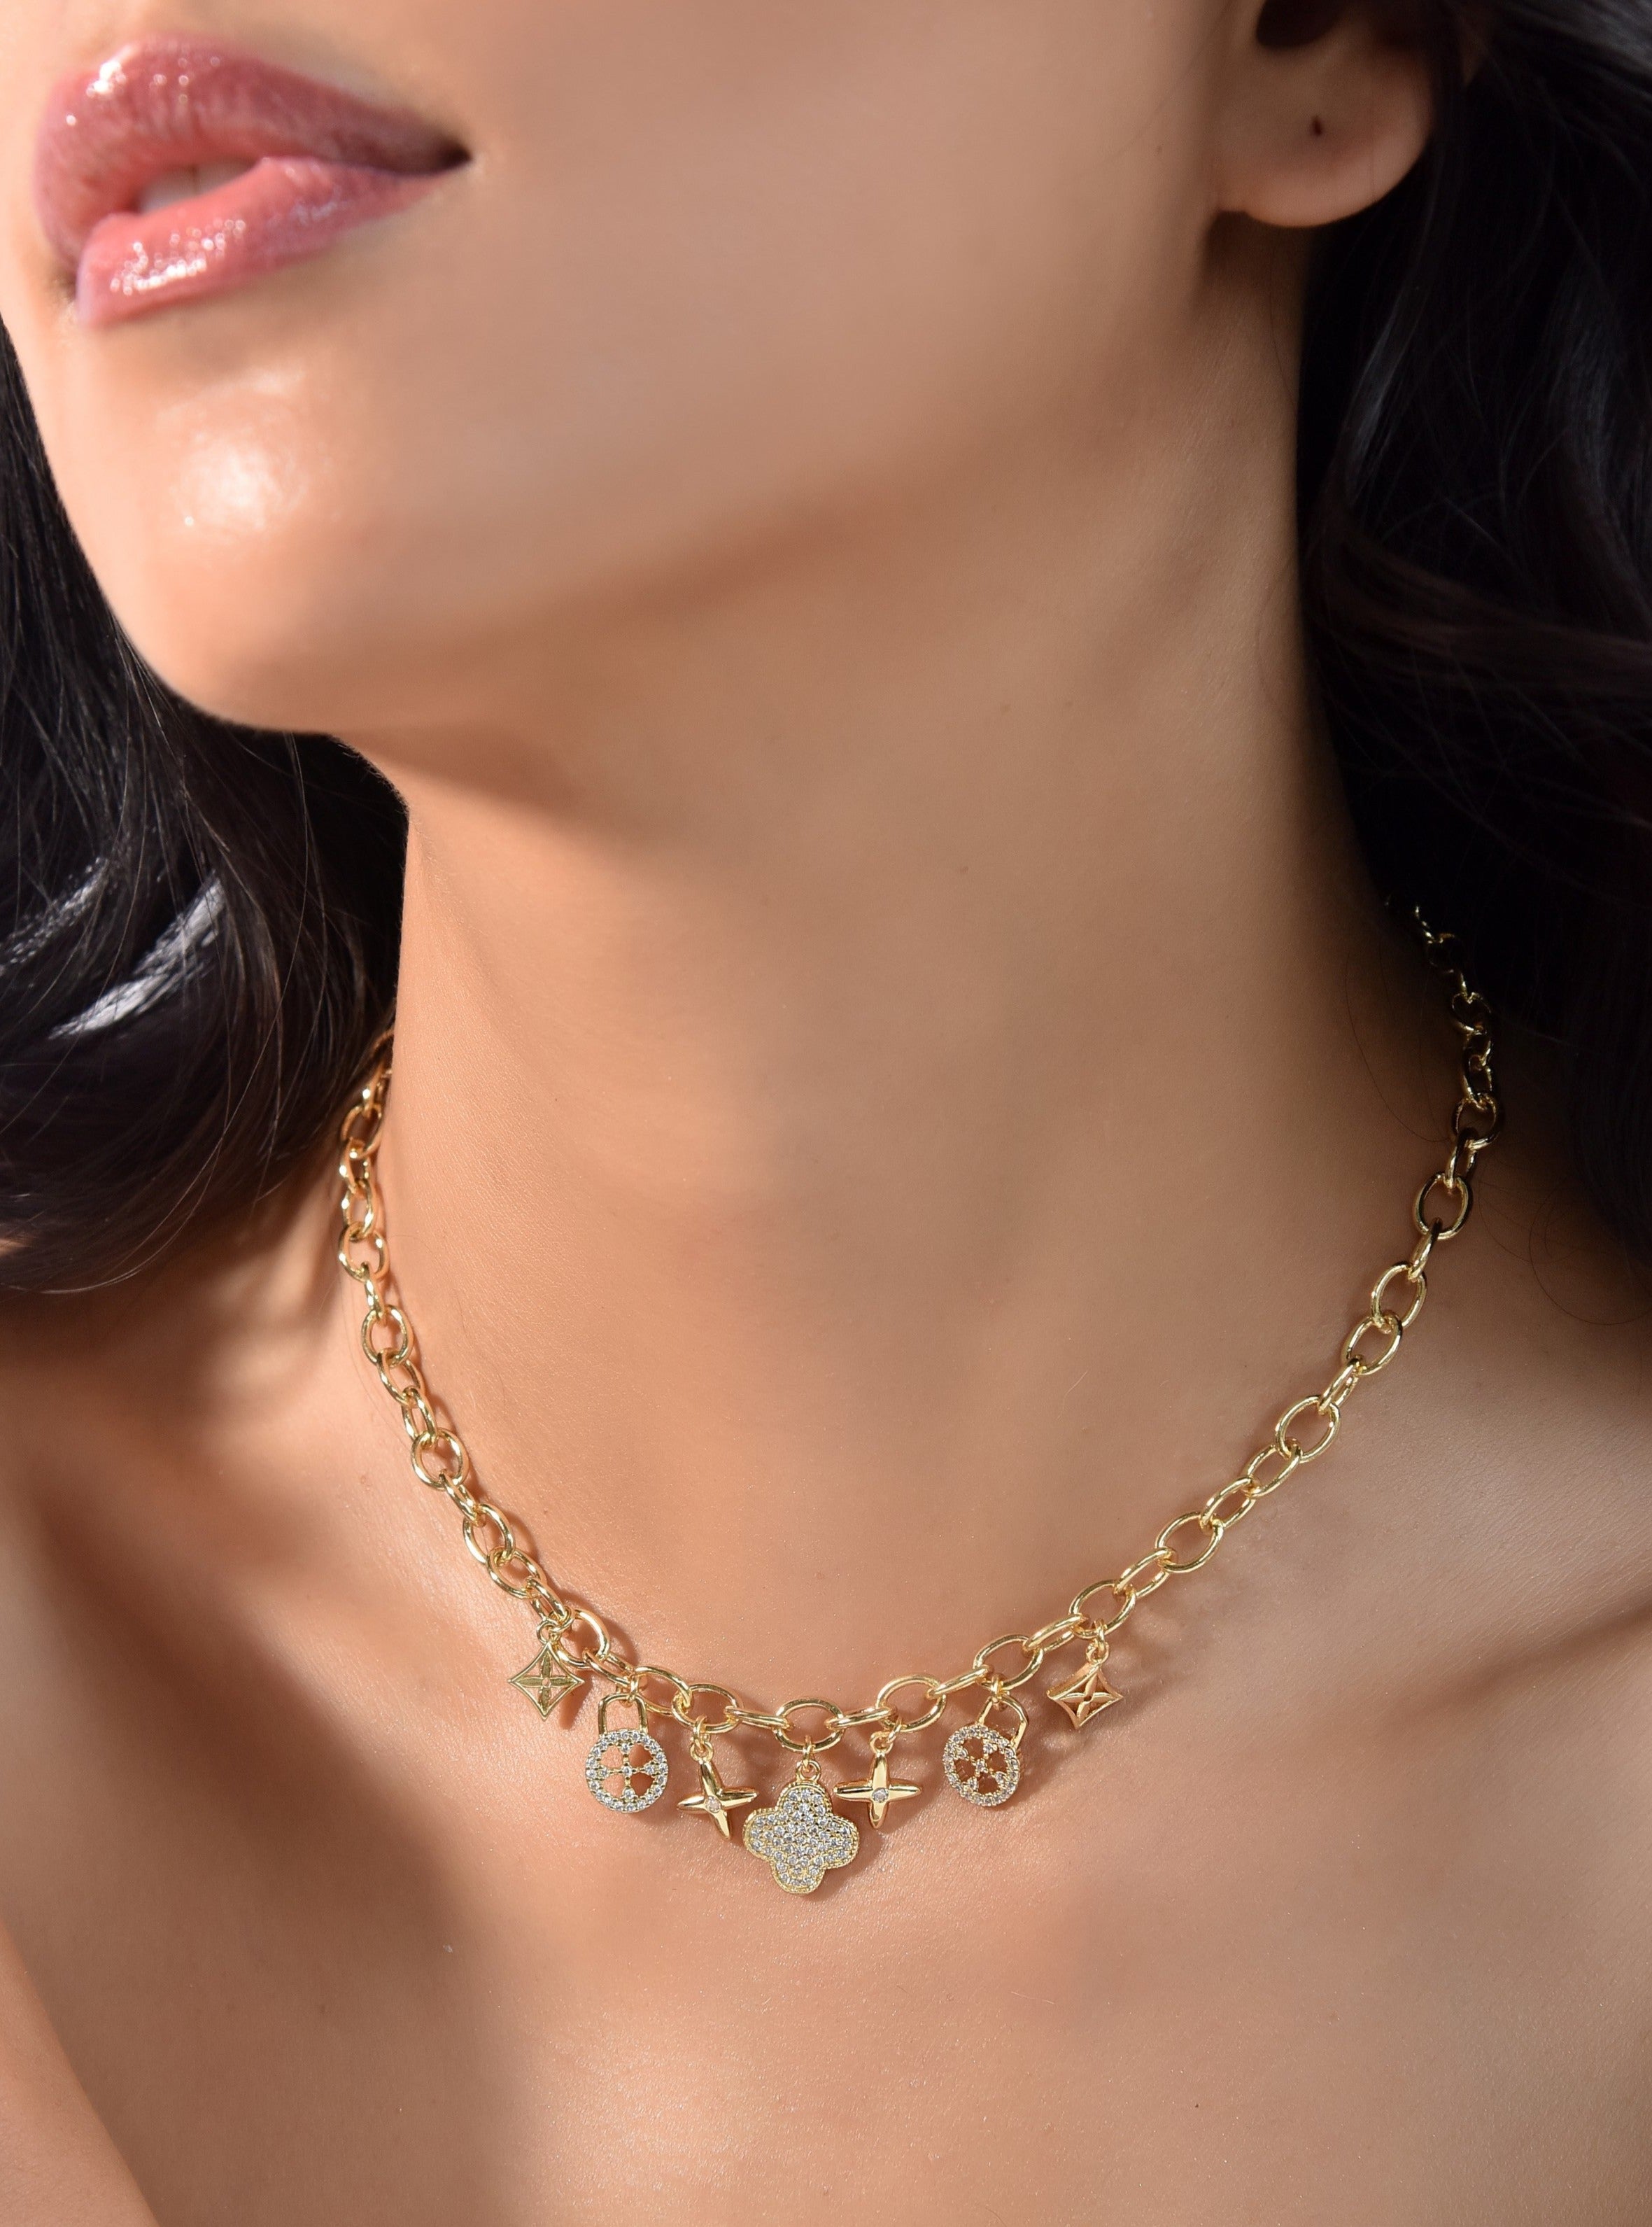 Louis Vuitton, Jewelry, Louis Vuitton Necklace Lv Blooming Supple Gold  Chain Clover Choker Style